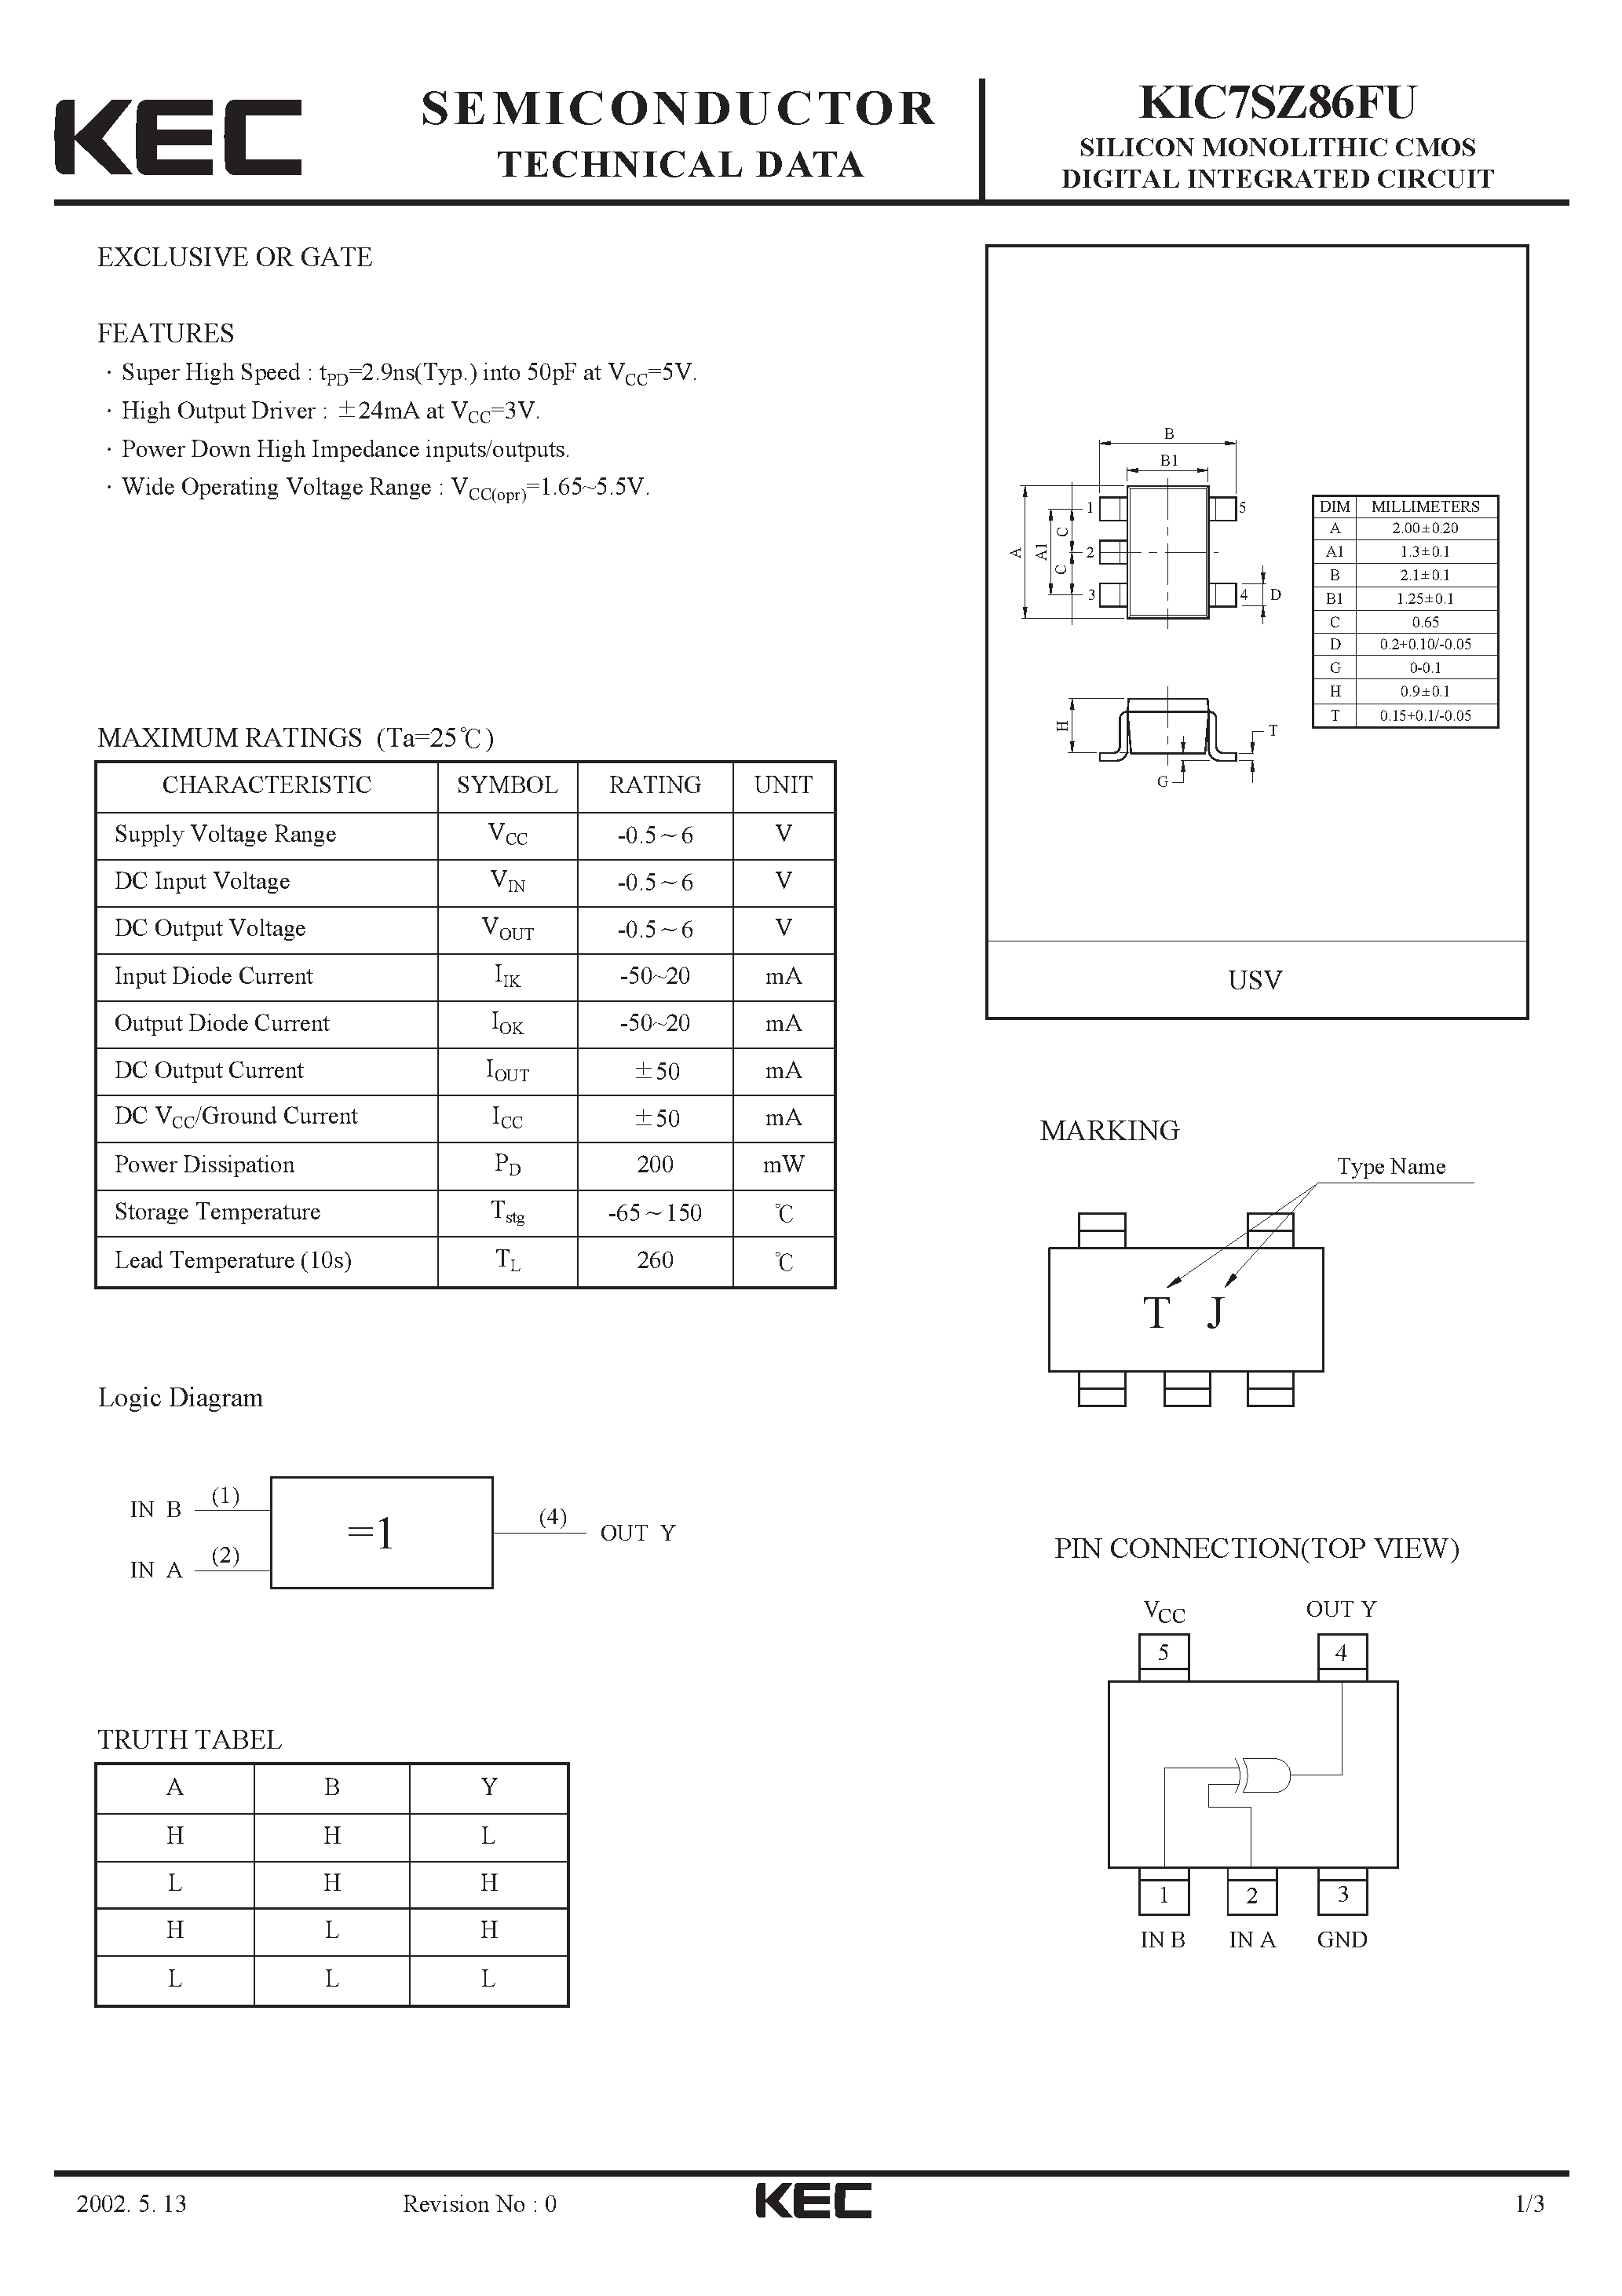 Datasheet KIC7SZ86FU - SILICON MONOLITHIC CMOS DIGITAL INTEGRATED CIRCUIT(EXCLUSIVE OR GATE) page 1